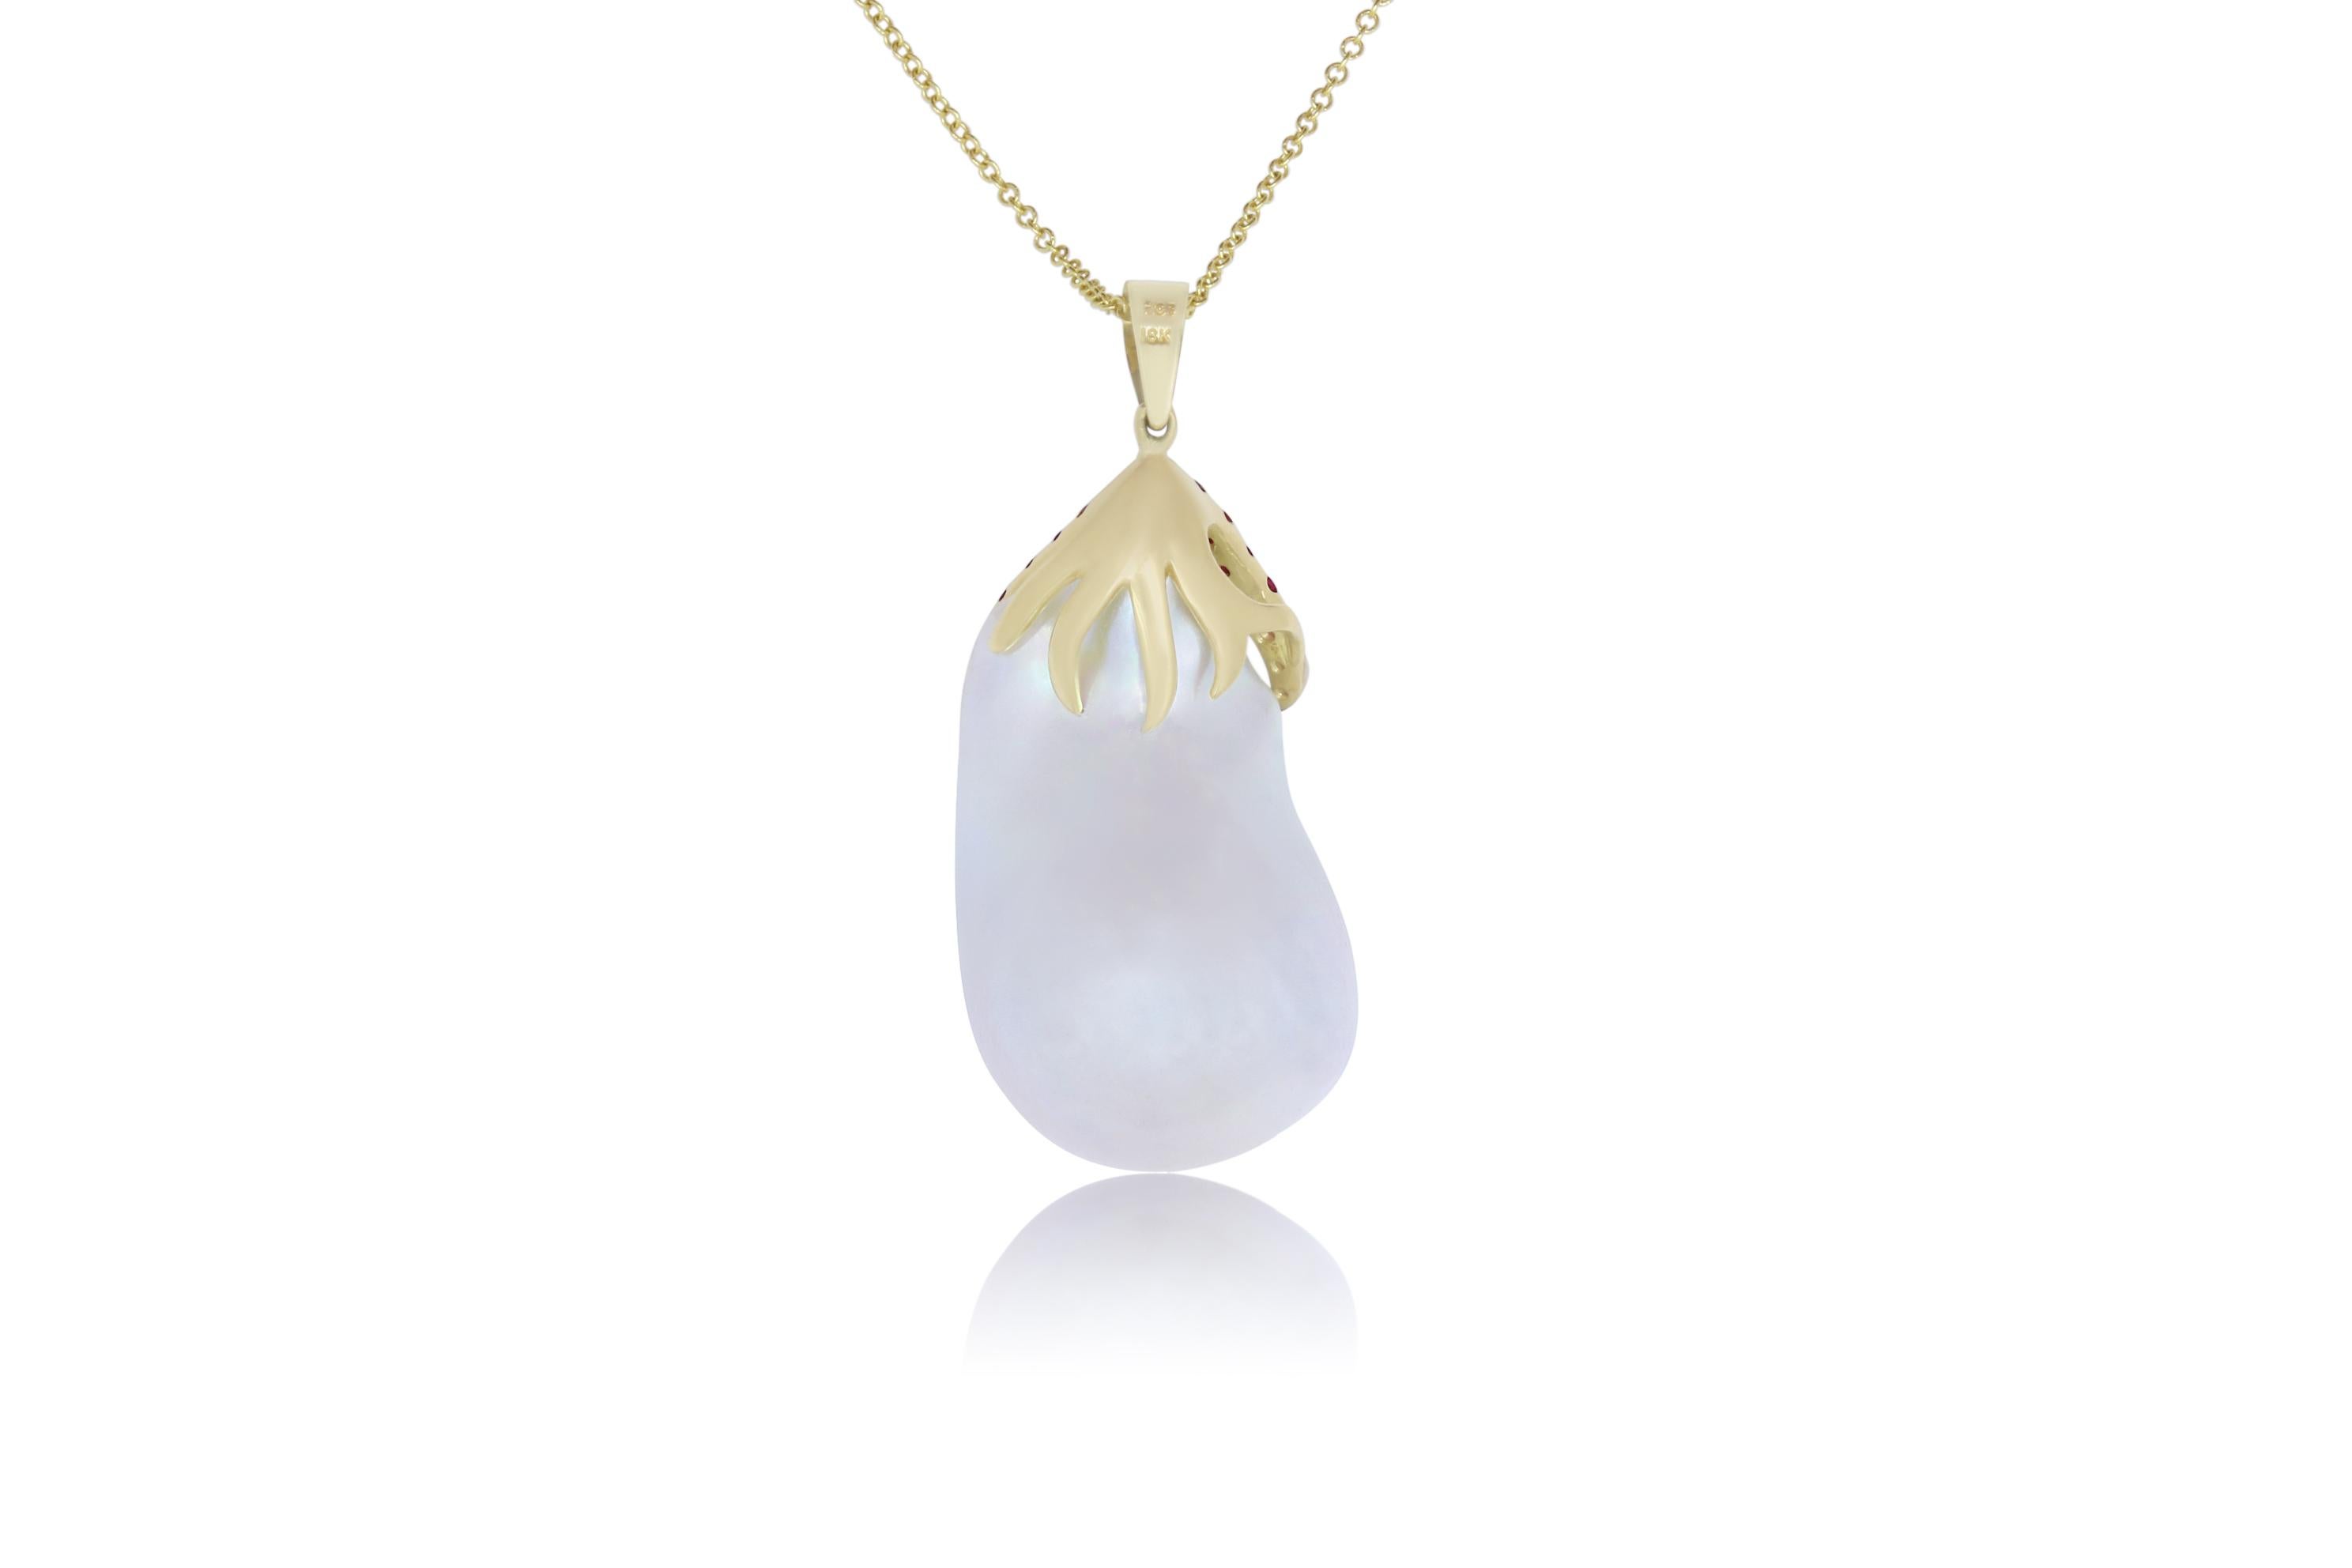 A one-of-a-kind piece, this 7.56 Carat White Pearl is adorned with Pink Sapphires and Diamonds. A truly unique piece that will have all eyes on you!

 Material: 18K Yellow Gold
Center Stone Details: 7.56 Carat Pearl
Mounting Stone Details:  19 Round